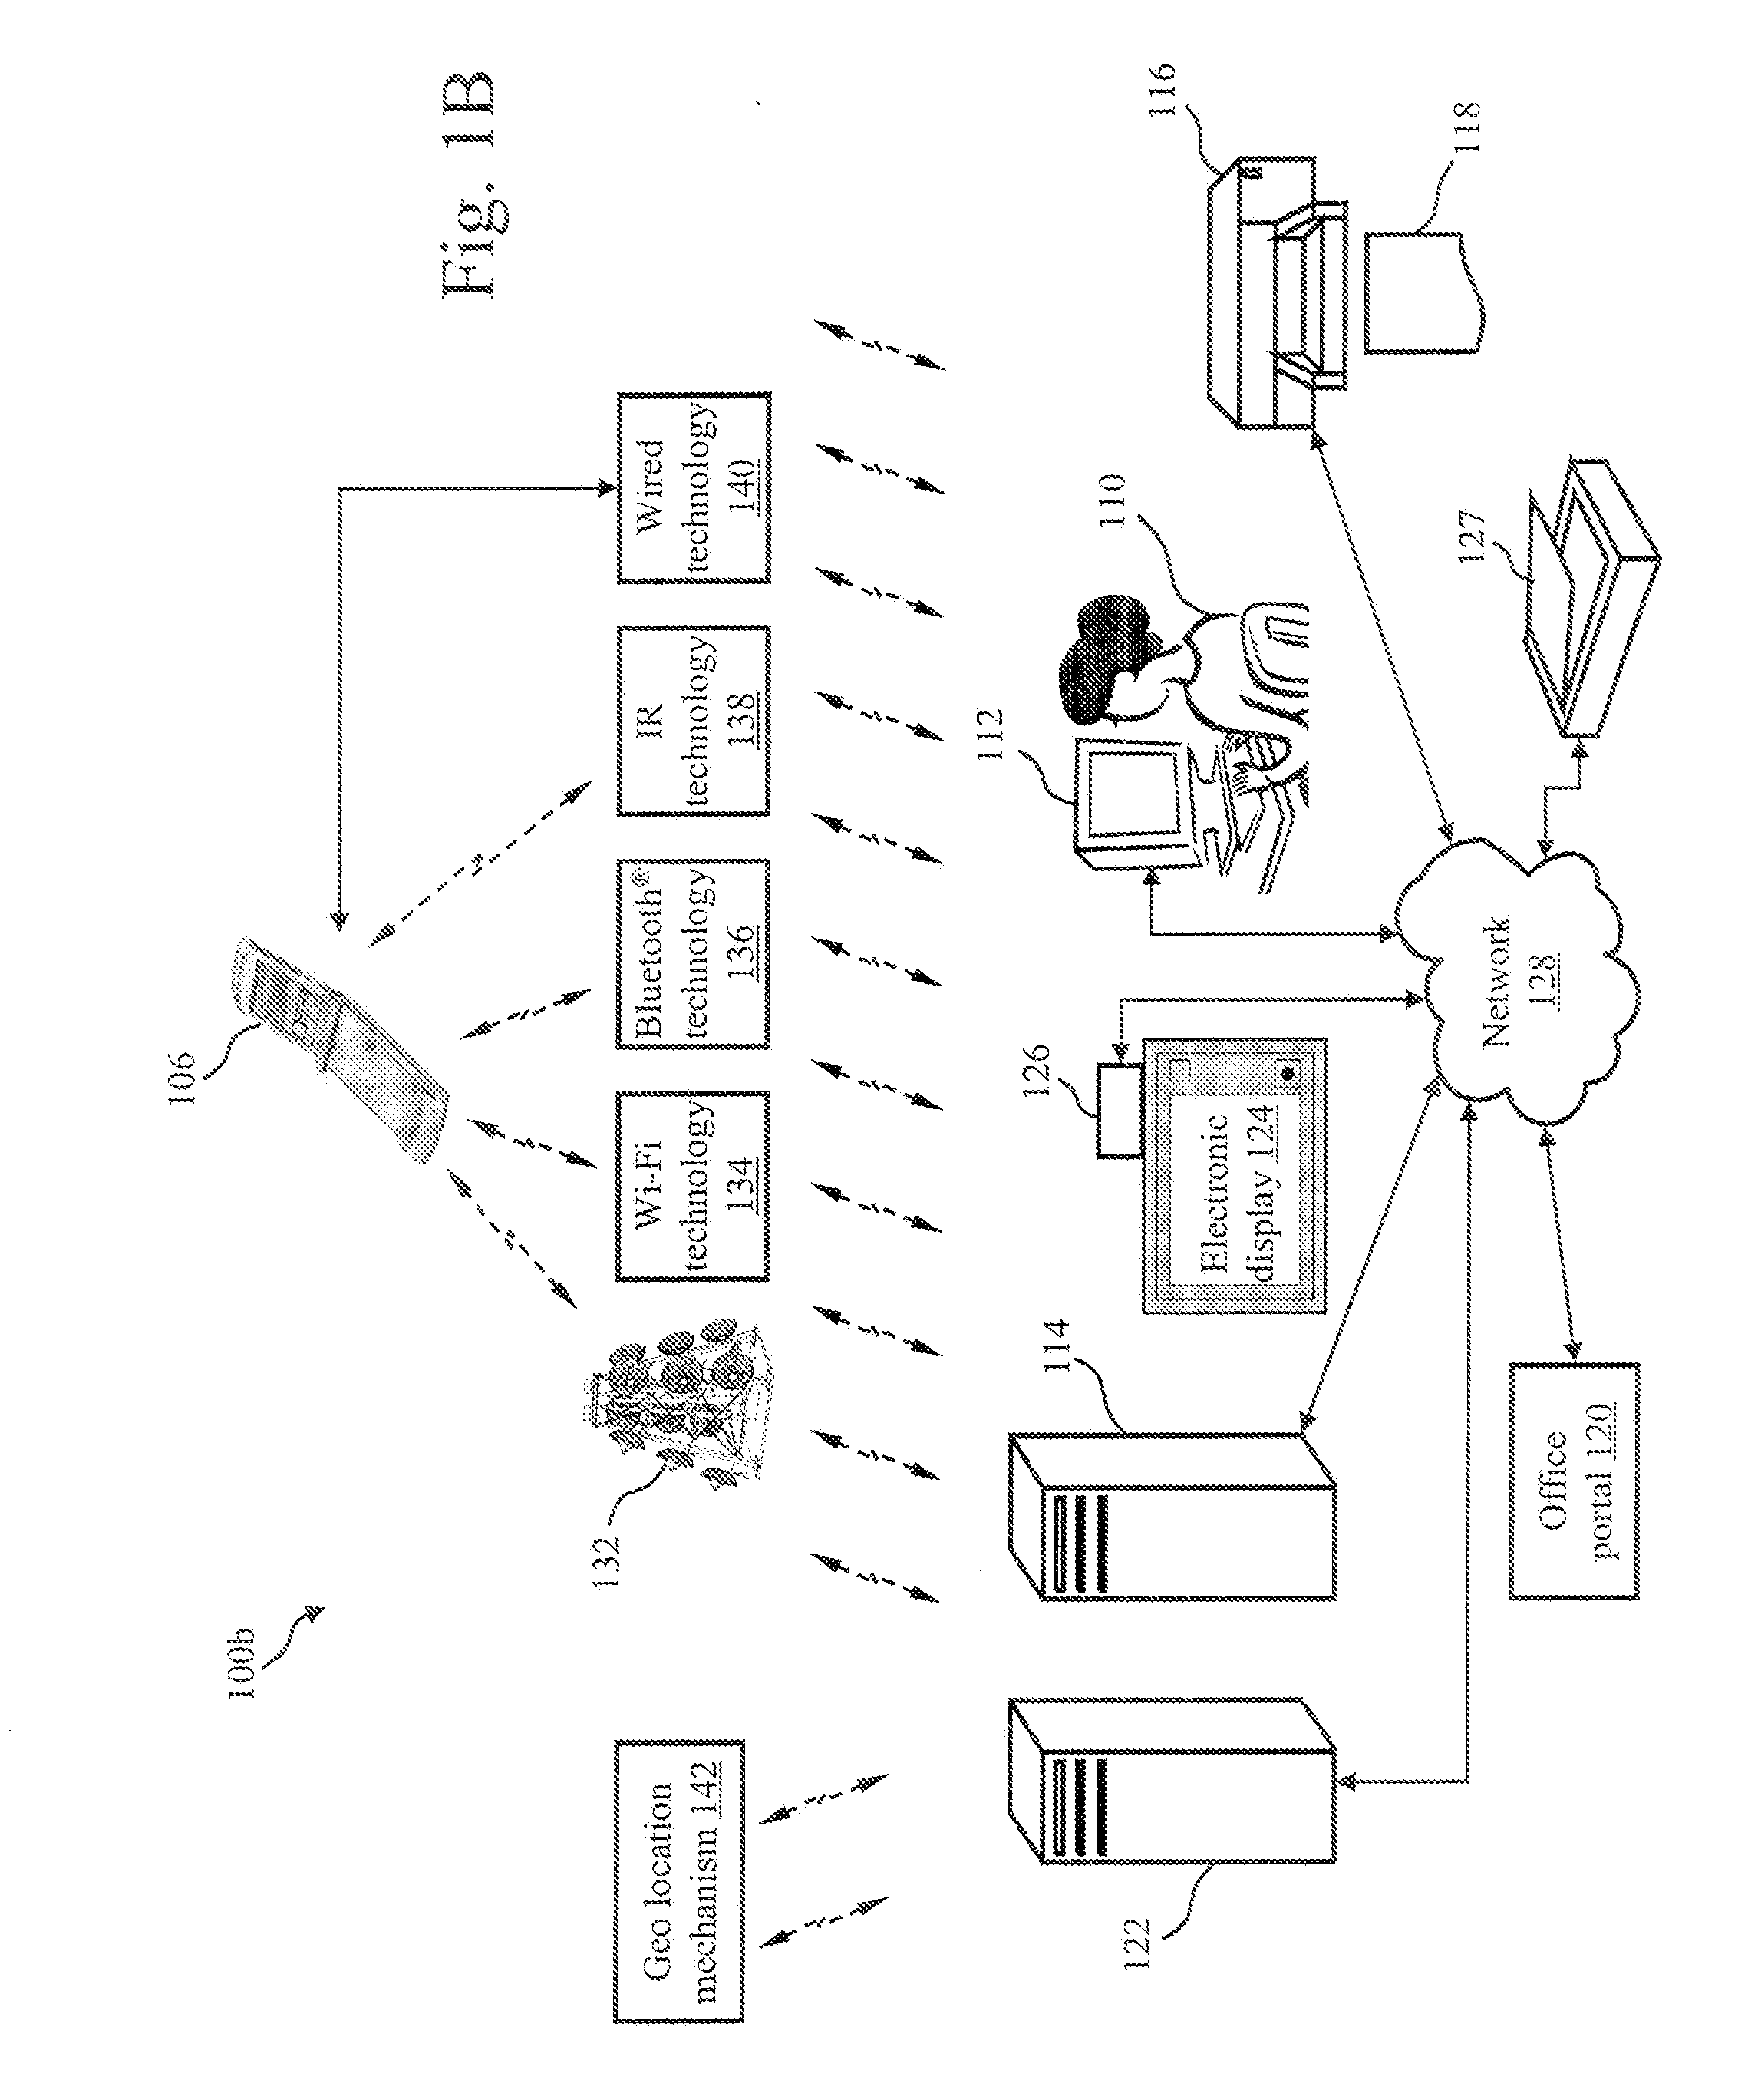 Method and System for Multi-Tier Image Matching in a Mixed Media Environment